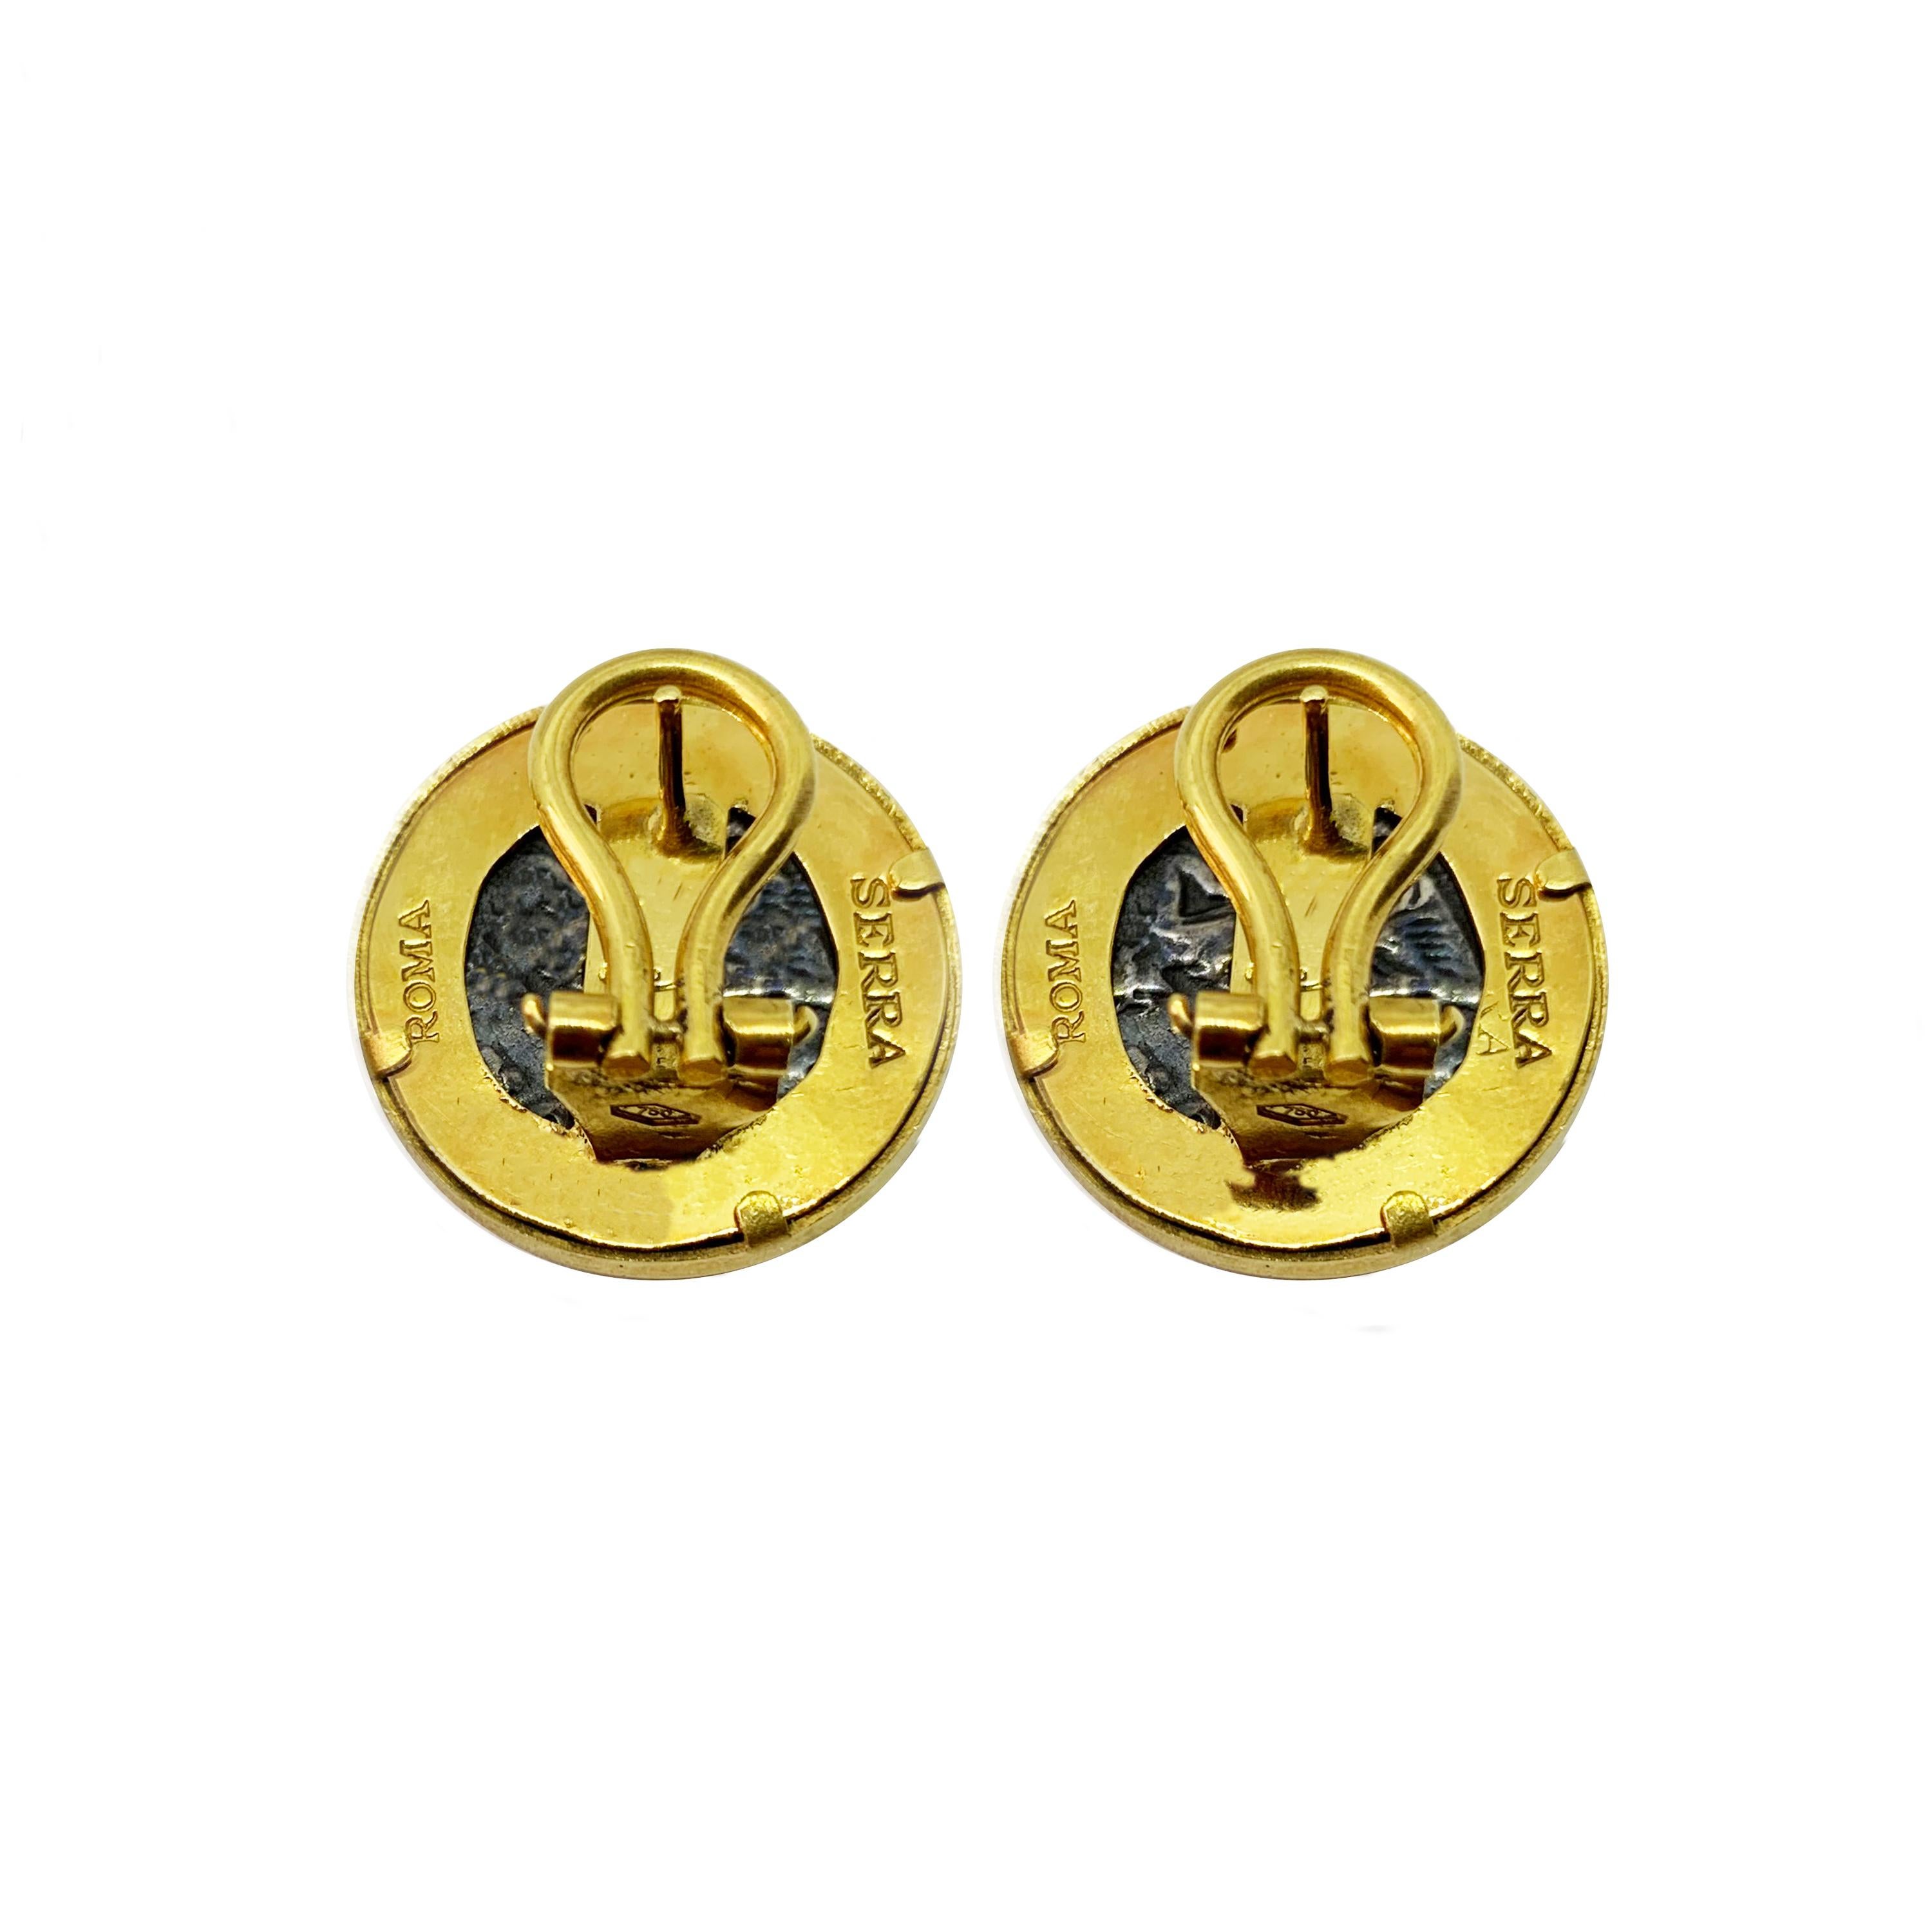 In these beautiful 18 Kt Gold earrings there are set  two authentic roman silver coins
 ( denarii- 2nd cent. A.D.) depicting Emperor Hadrian and his wife Sabina .

Emperor Hadrian is remembered for his travels, his building projects, and his efforts